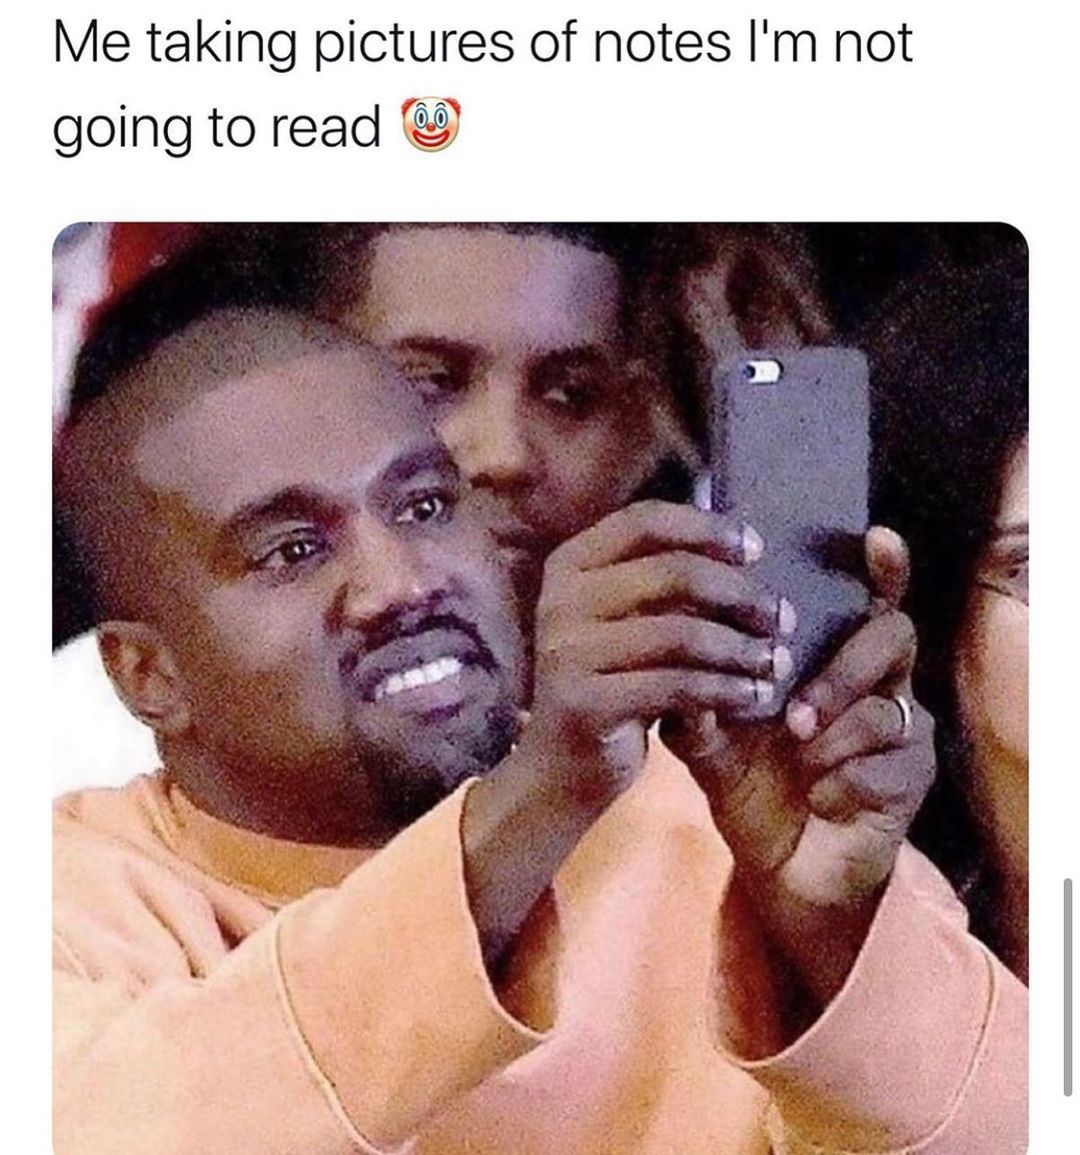 Me taking pictures of notes I'm not going to read.